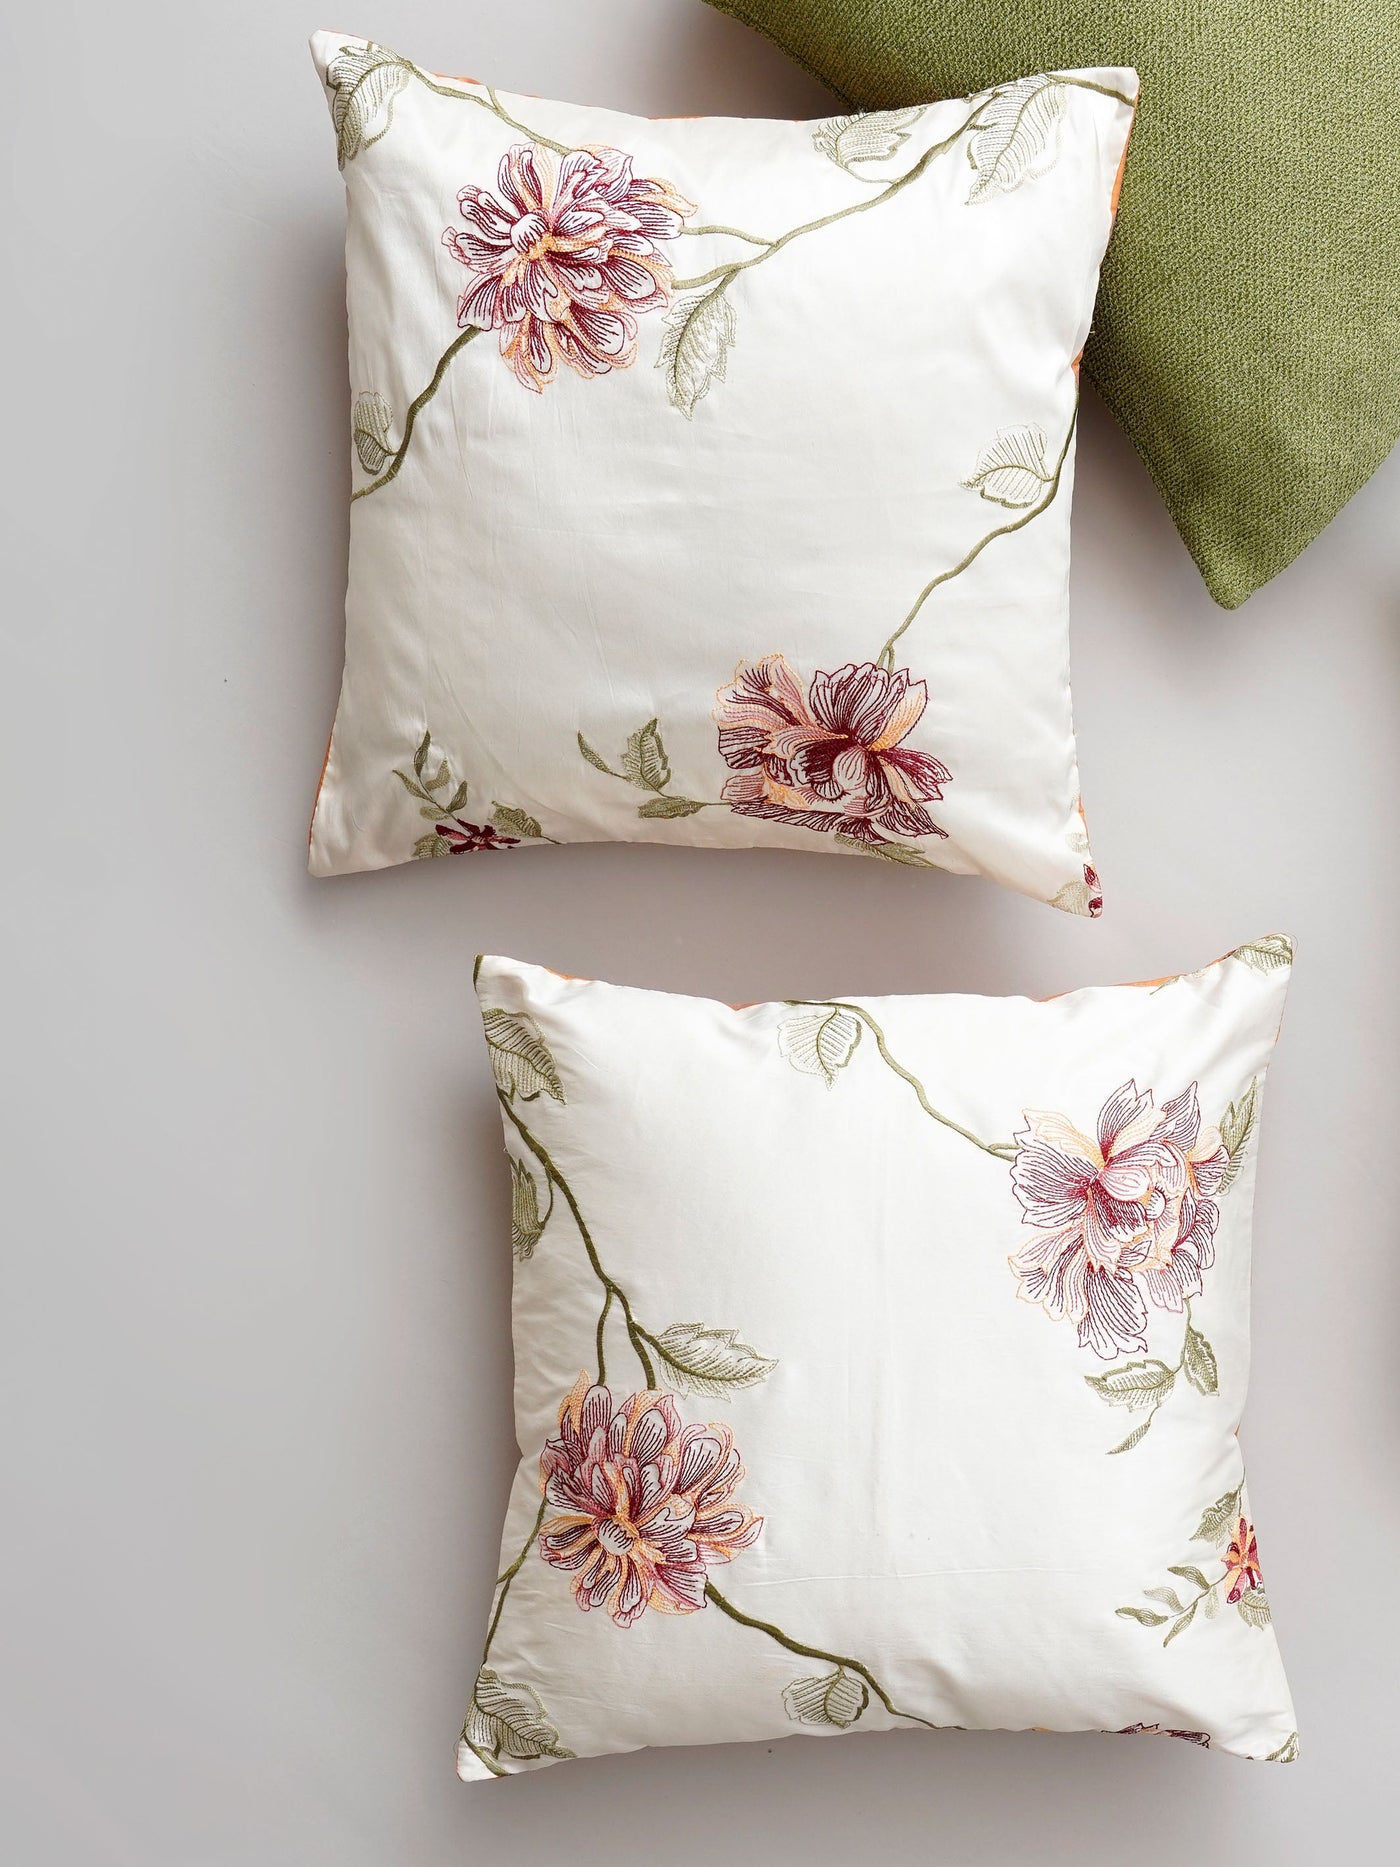 Autumn Bloom Embroidered Cushion